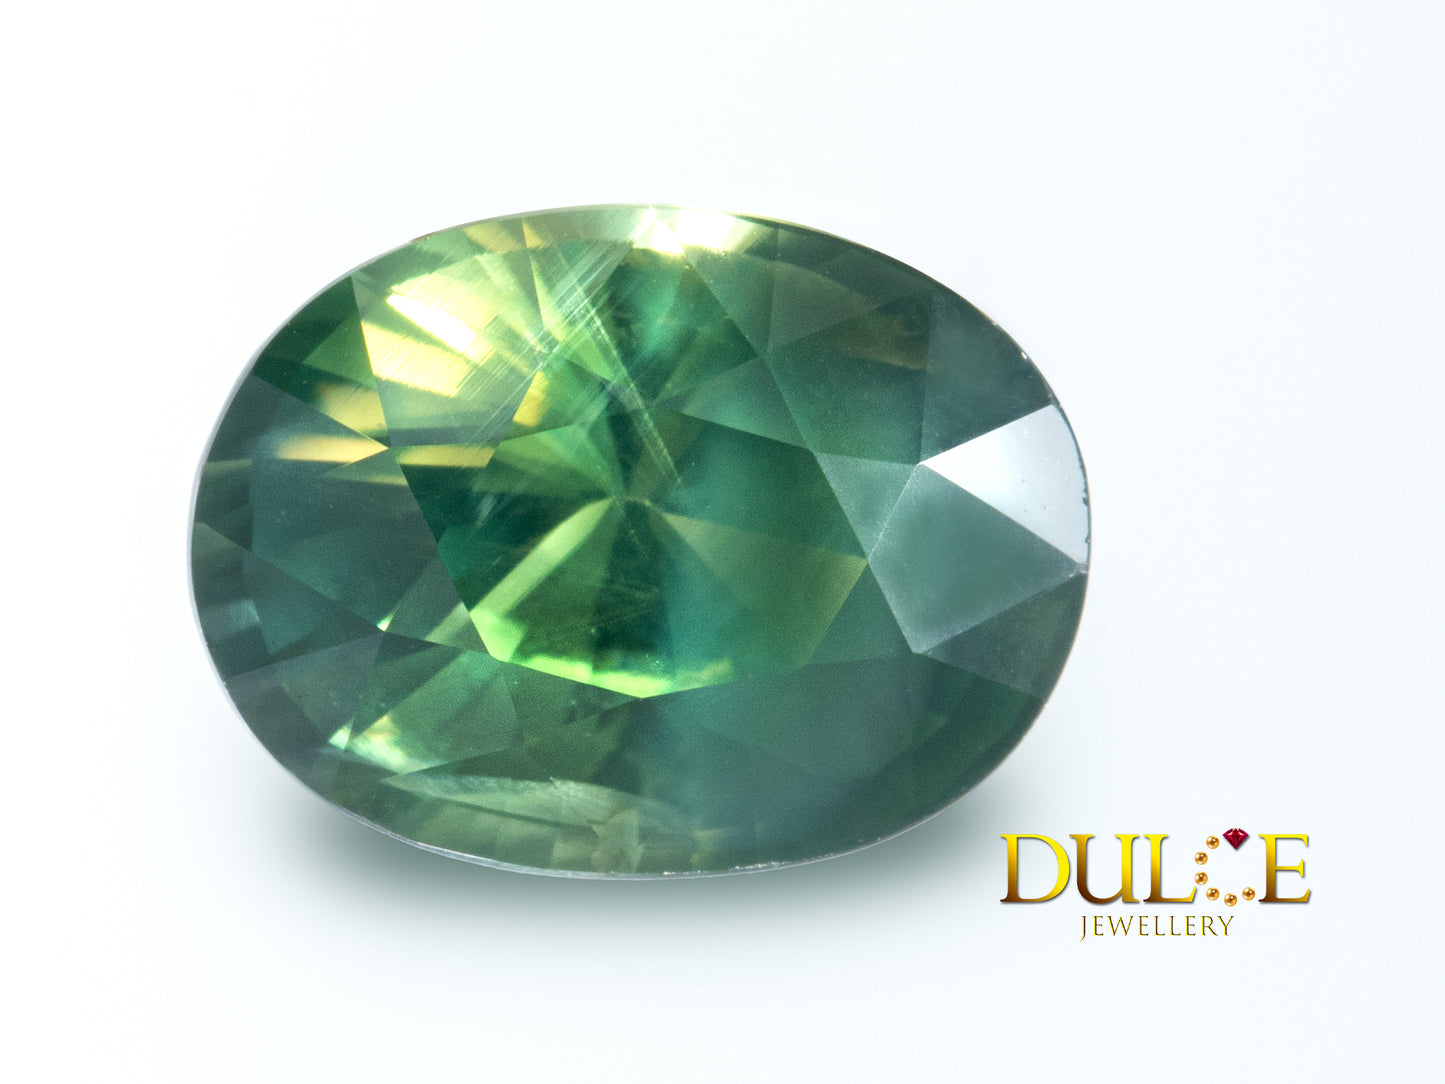 Green Sapphire (GS255) (Price by request)